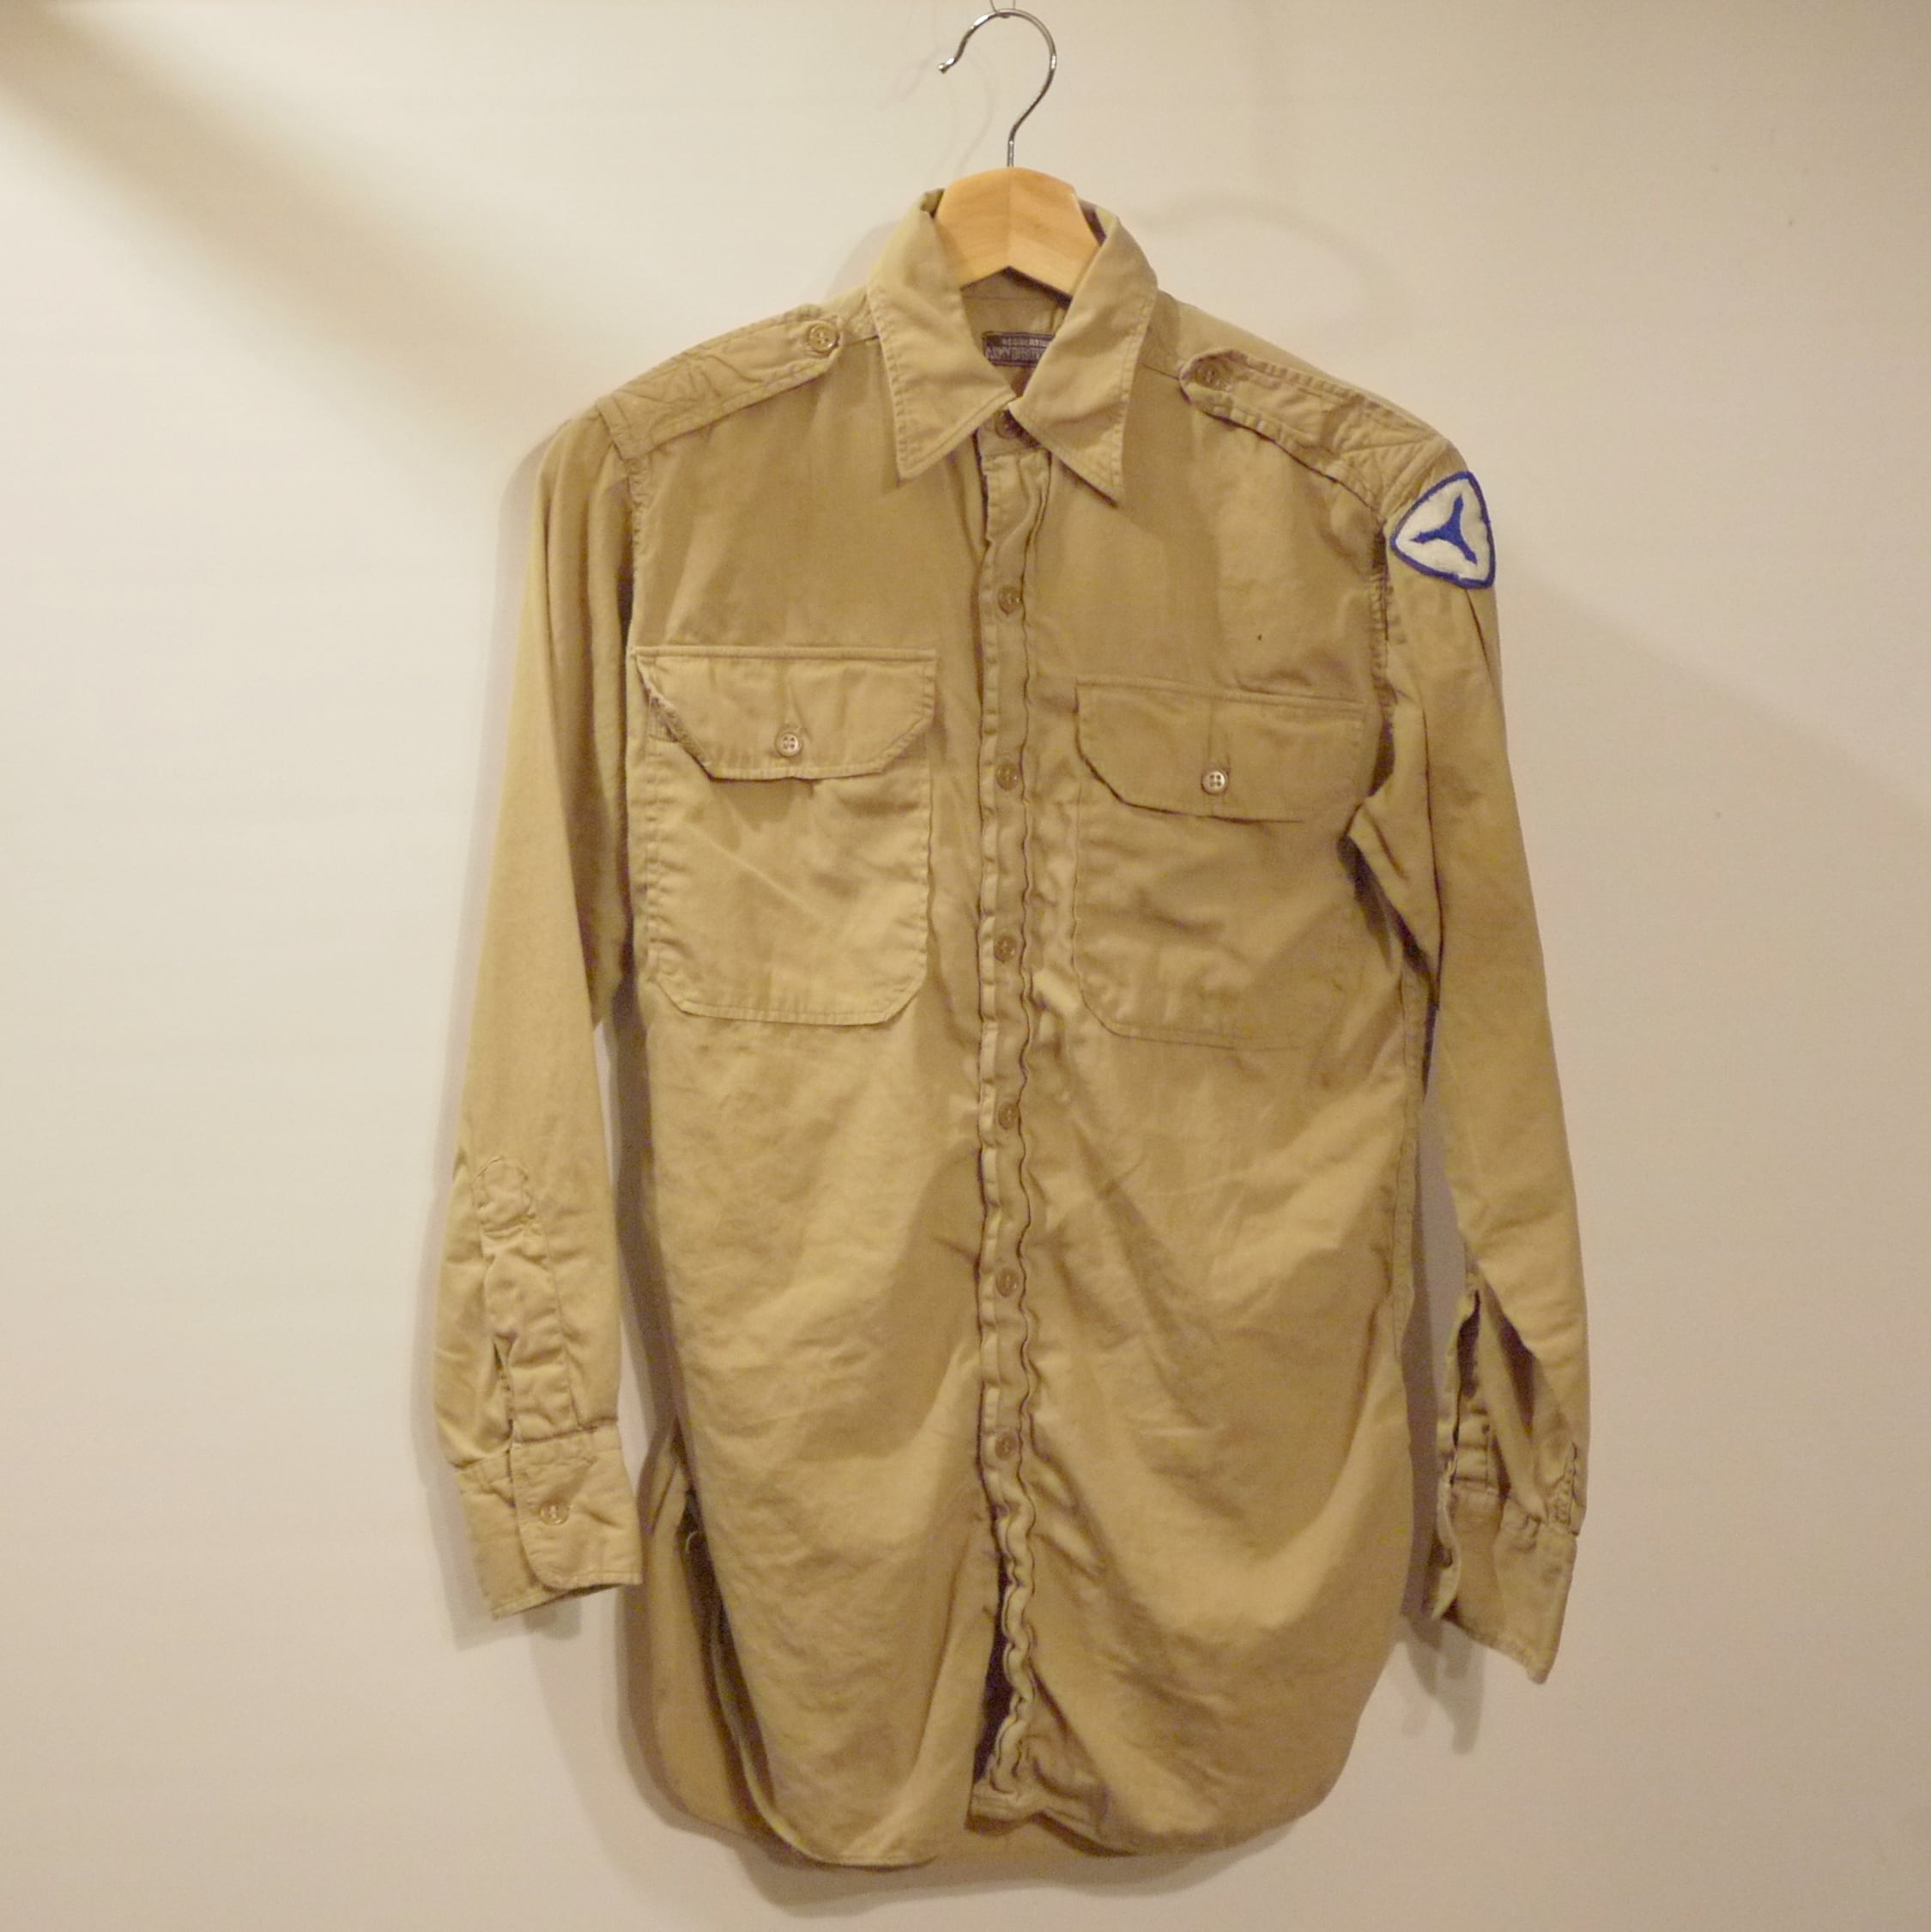 U.S.ARMY 1940's OFFICER'S SHIRT | HOLIDAY WORKS